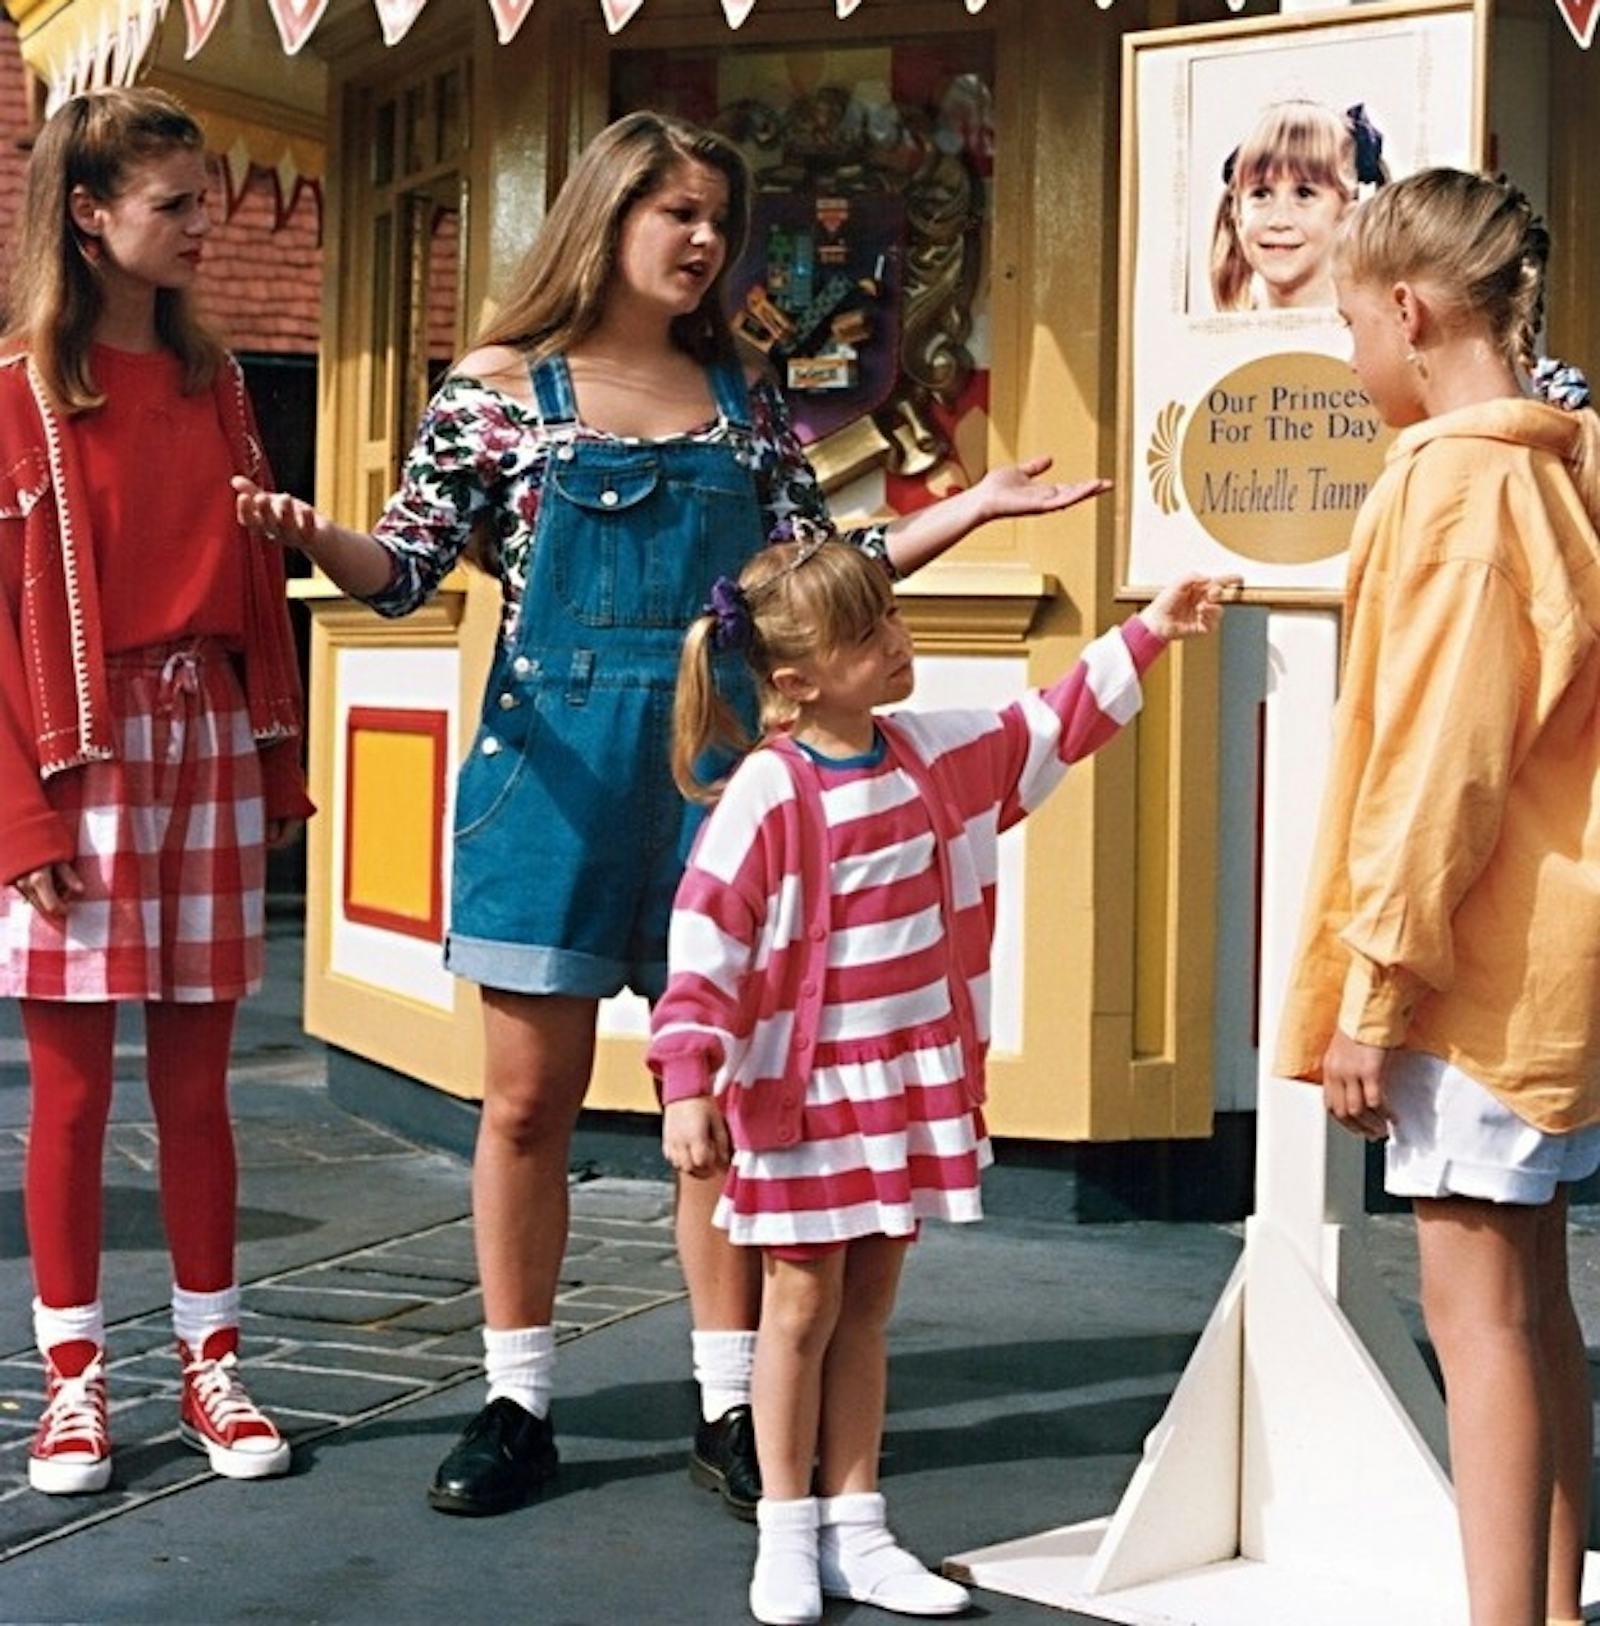 11 Reasons Full House S Disney World Episode Is The Best One In The Entire Series